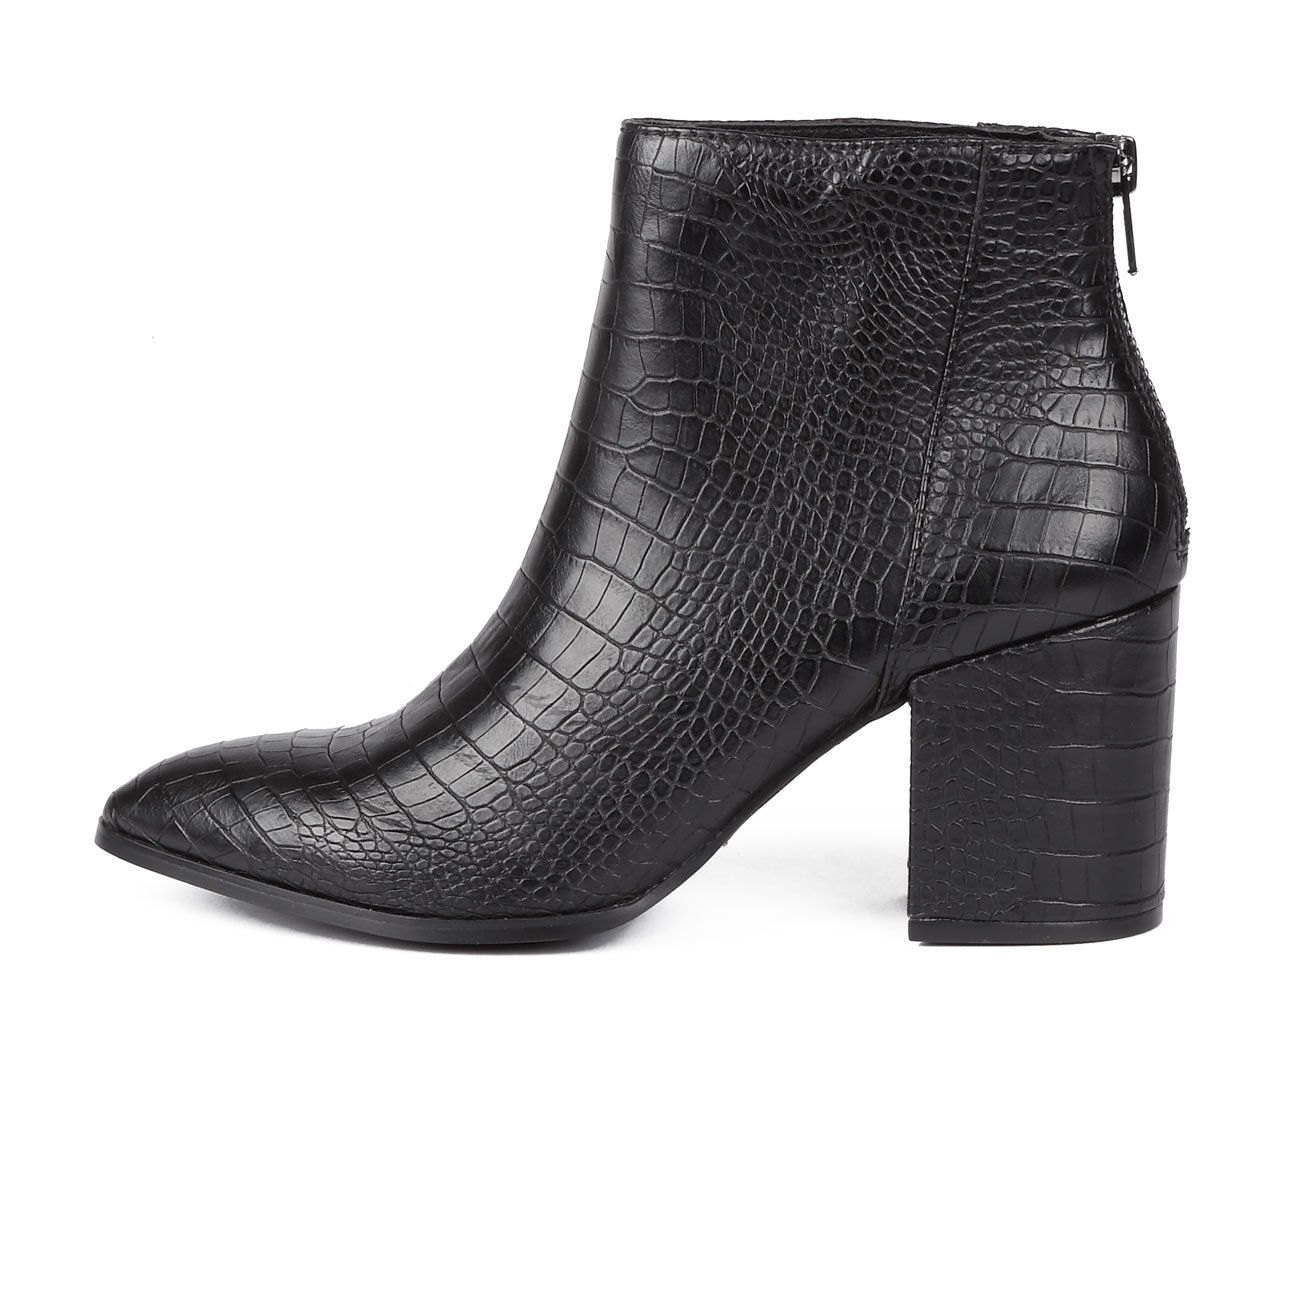 STEVE MADDEN CROCODILE ANKLE BOOTS WITH WIDE HEEL Woman Black ...